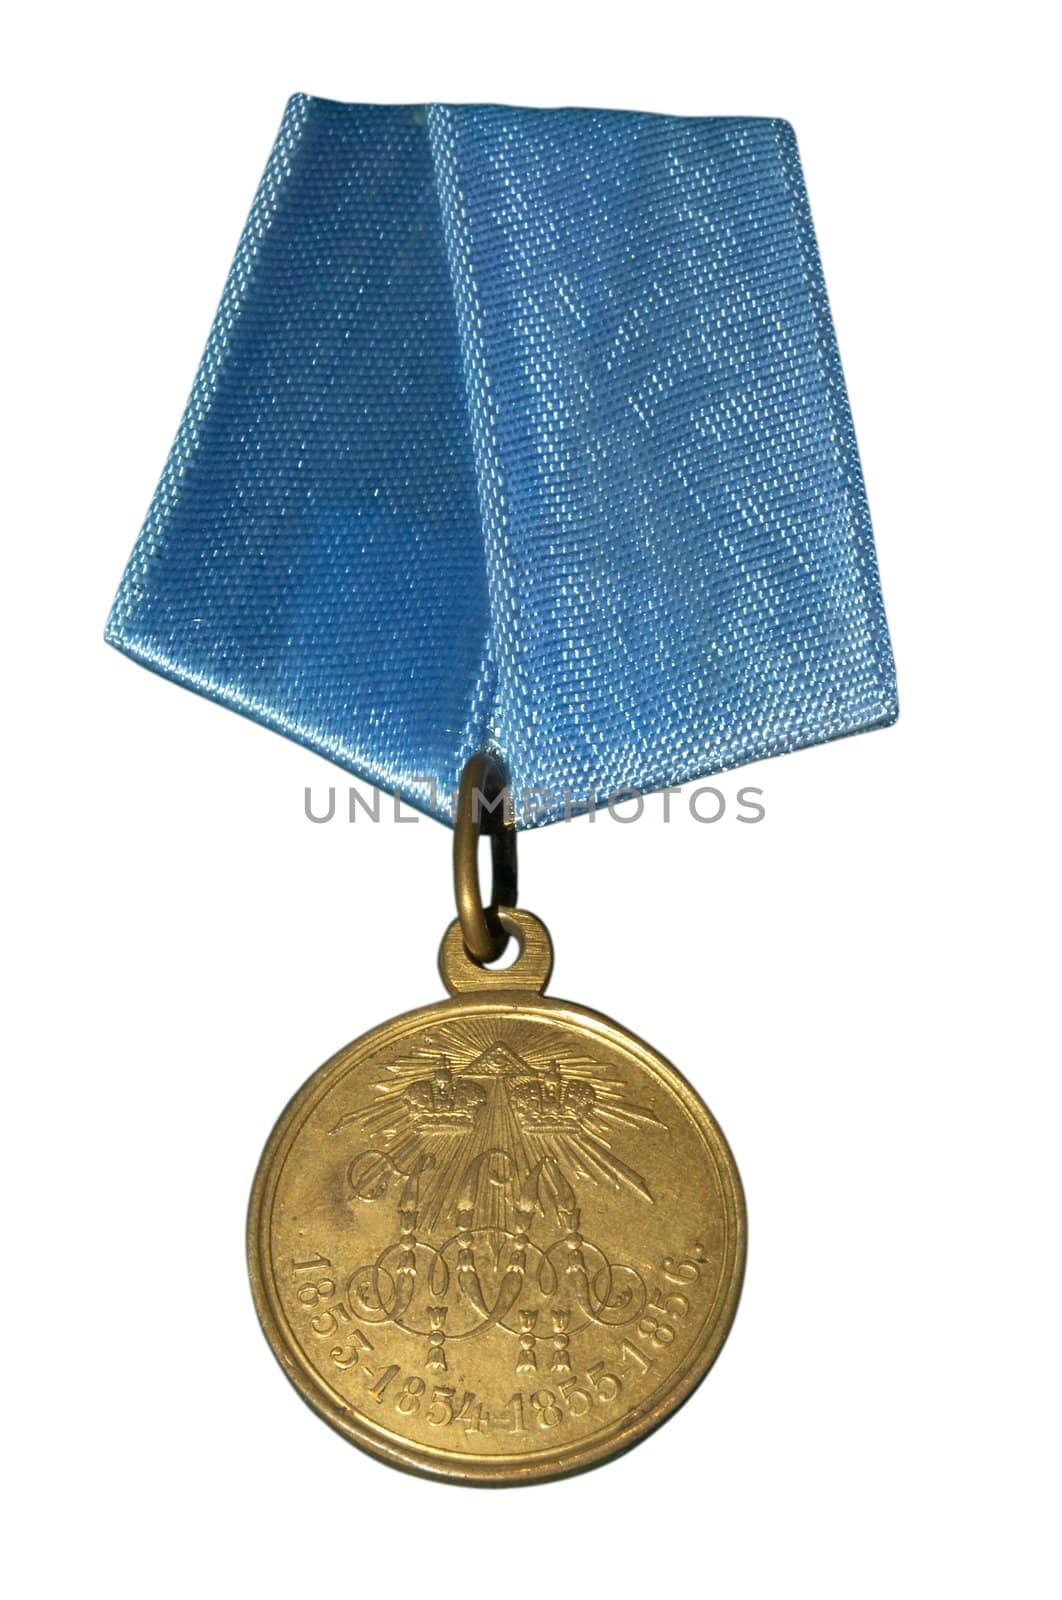 Medal of imperial Russia which awarded in 19 century